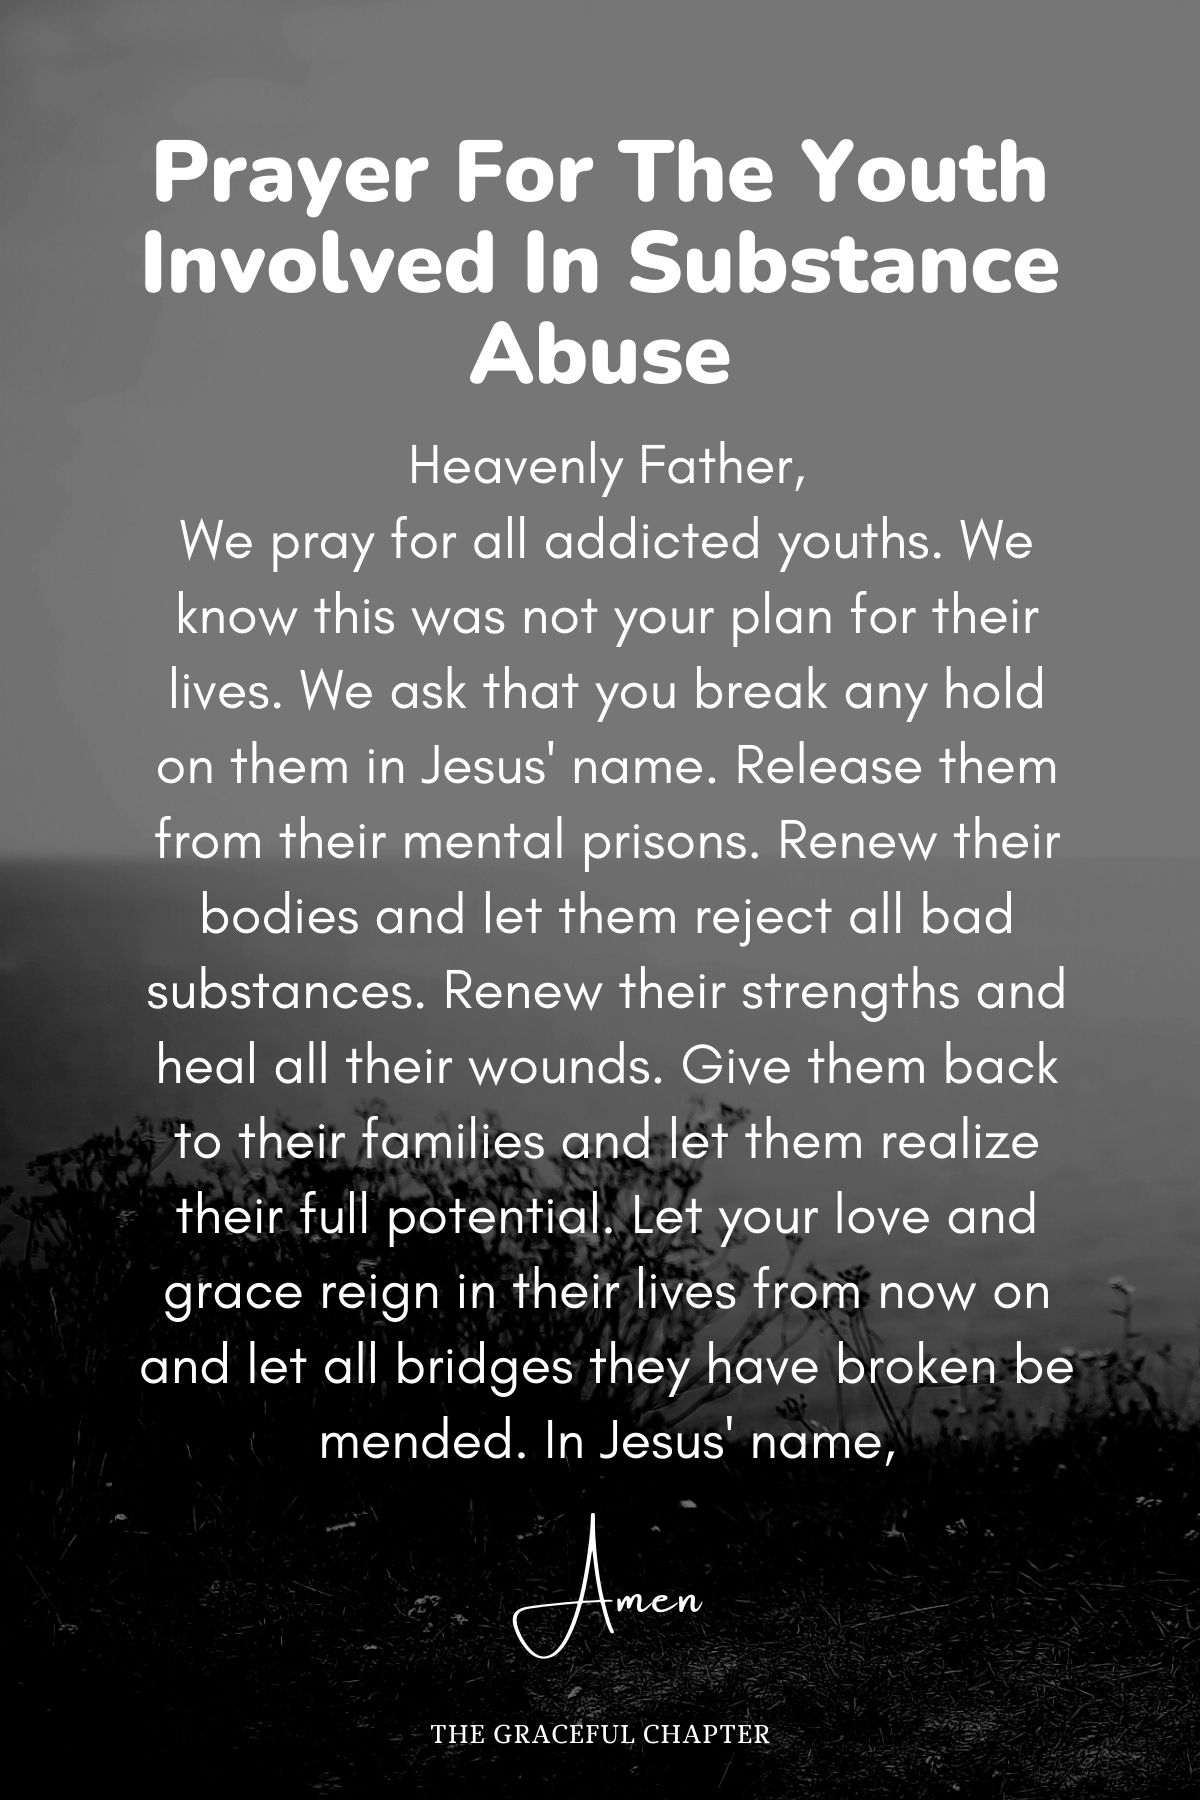 Prayer for the youth involved in substance abuse